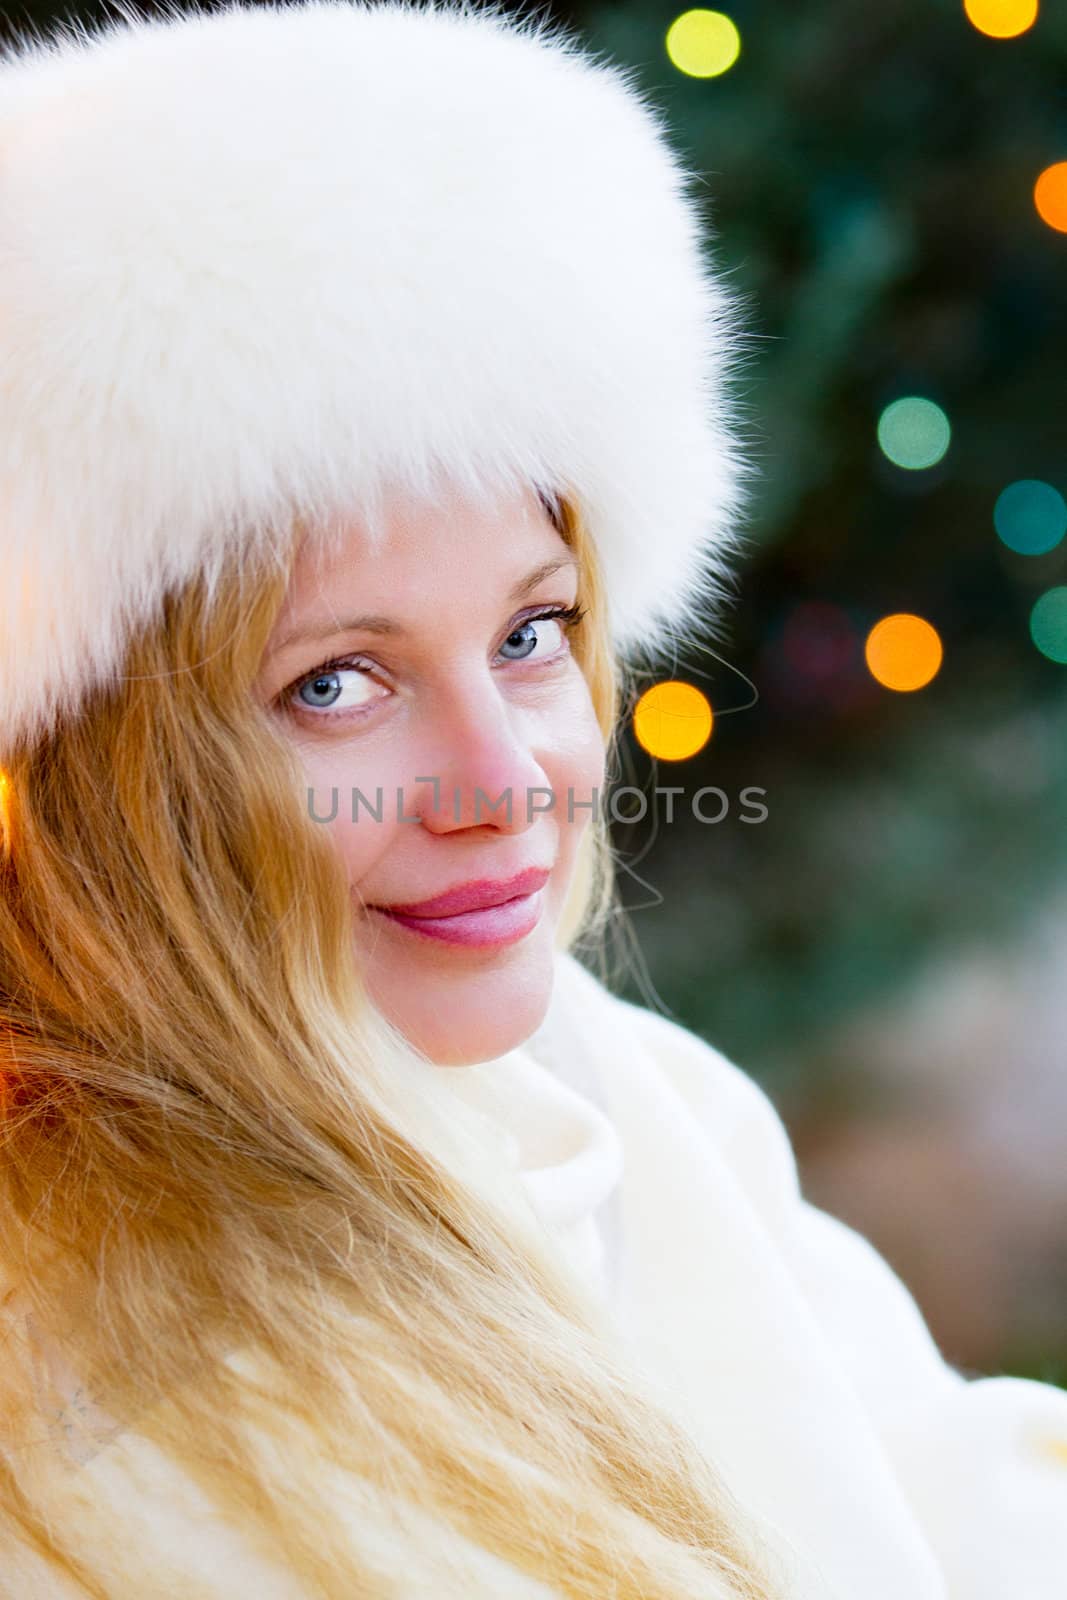 Pretty Blonde Woman wearing a White Fur Hat with Christmas Lights behind her